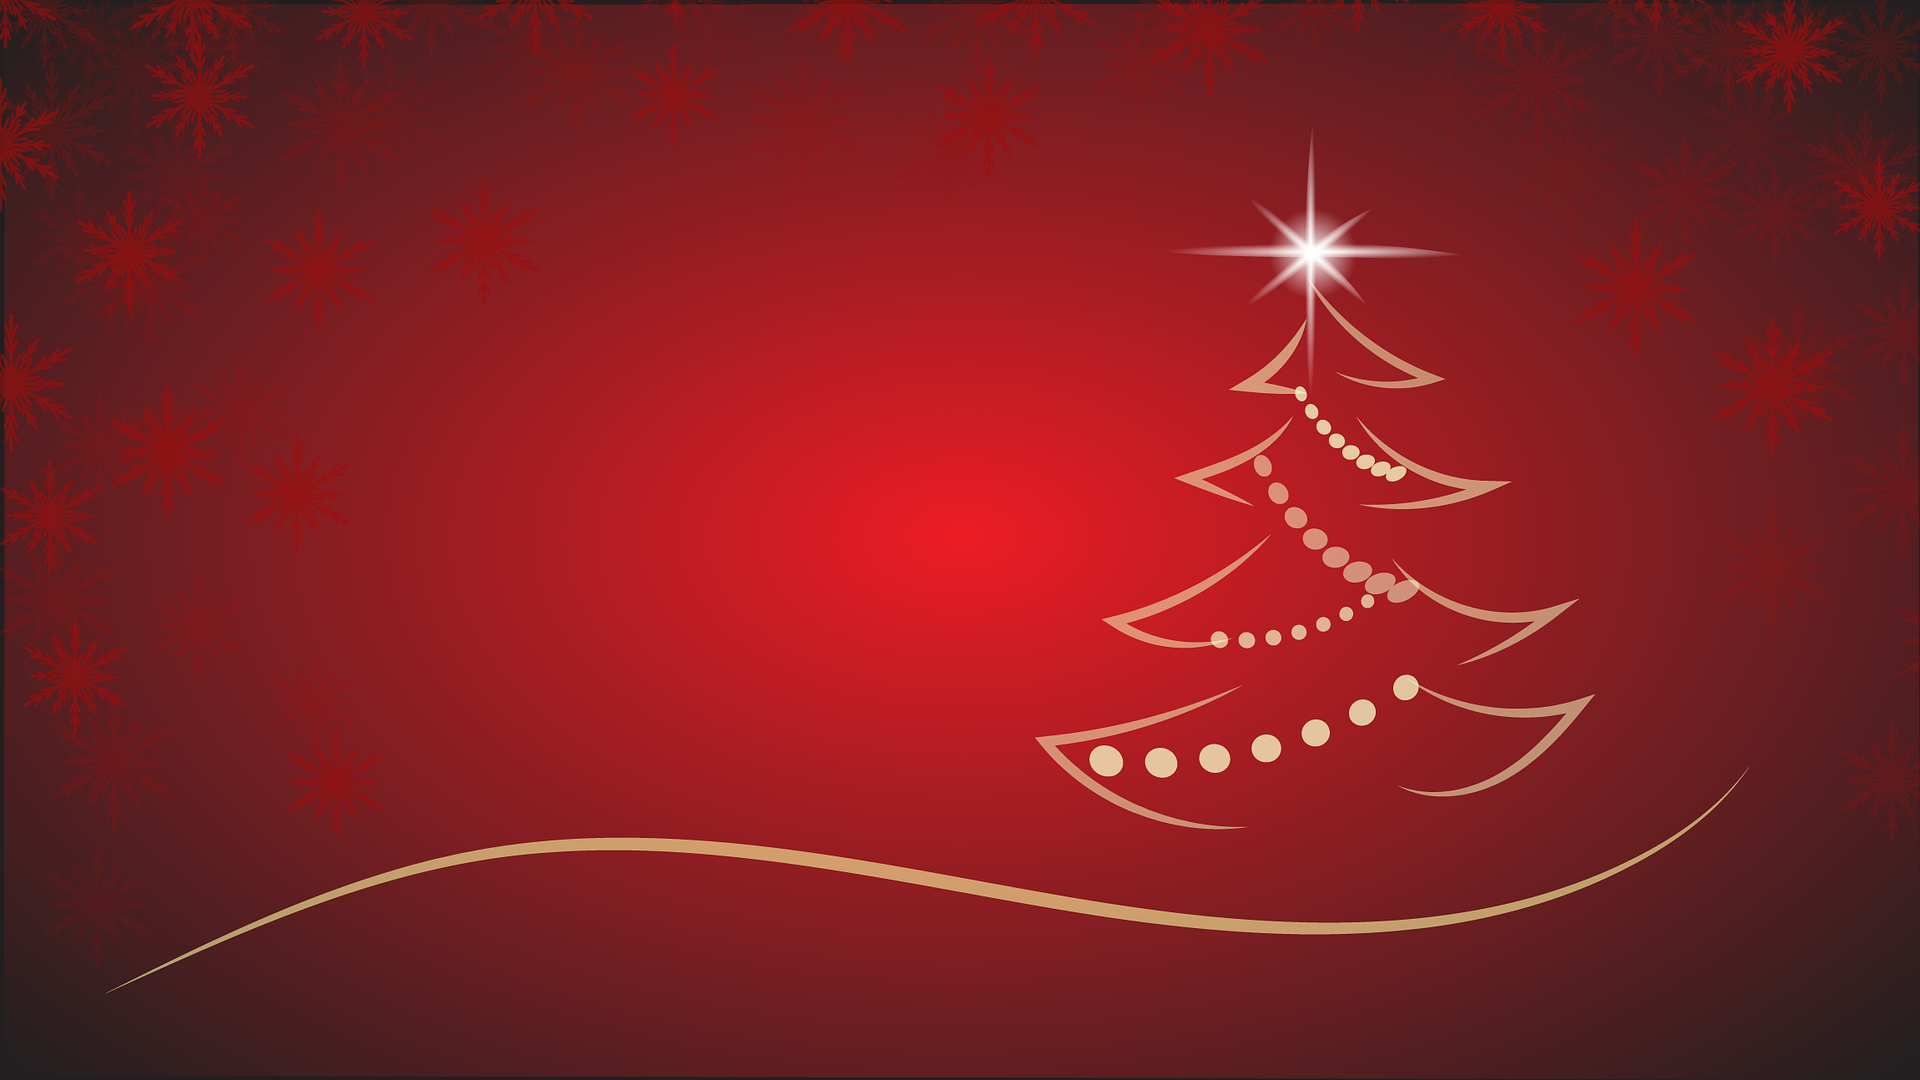 Christmas tree symbol on red background